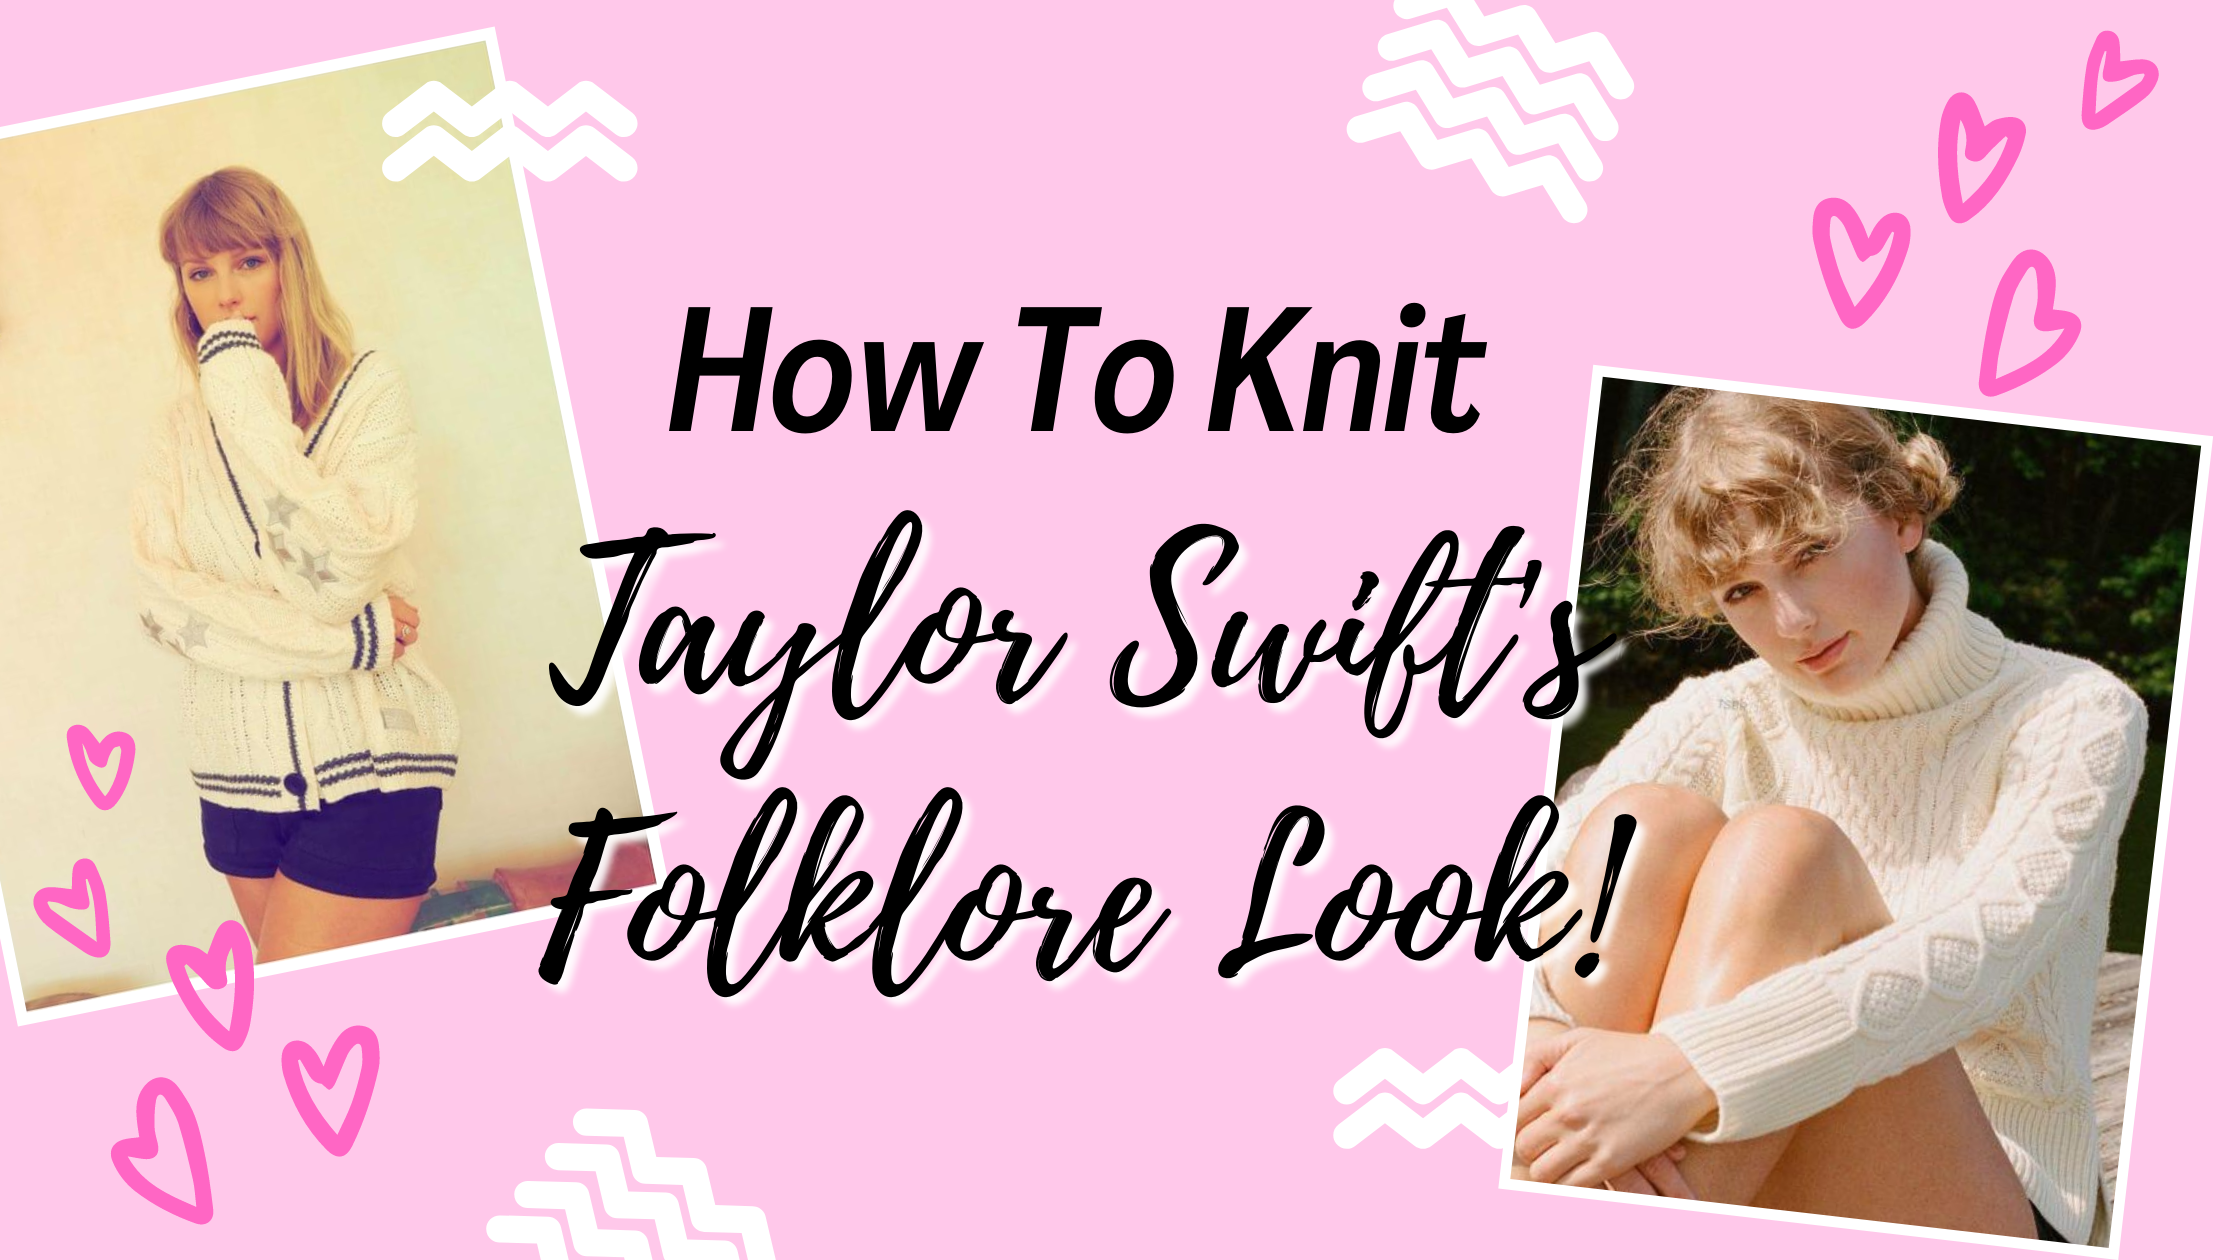 Taylor Swift Knit The Look Blog Let S Knit Magazine